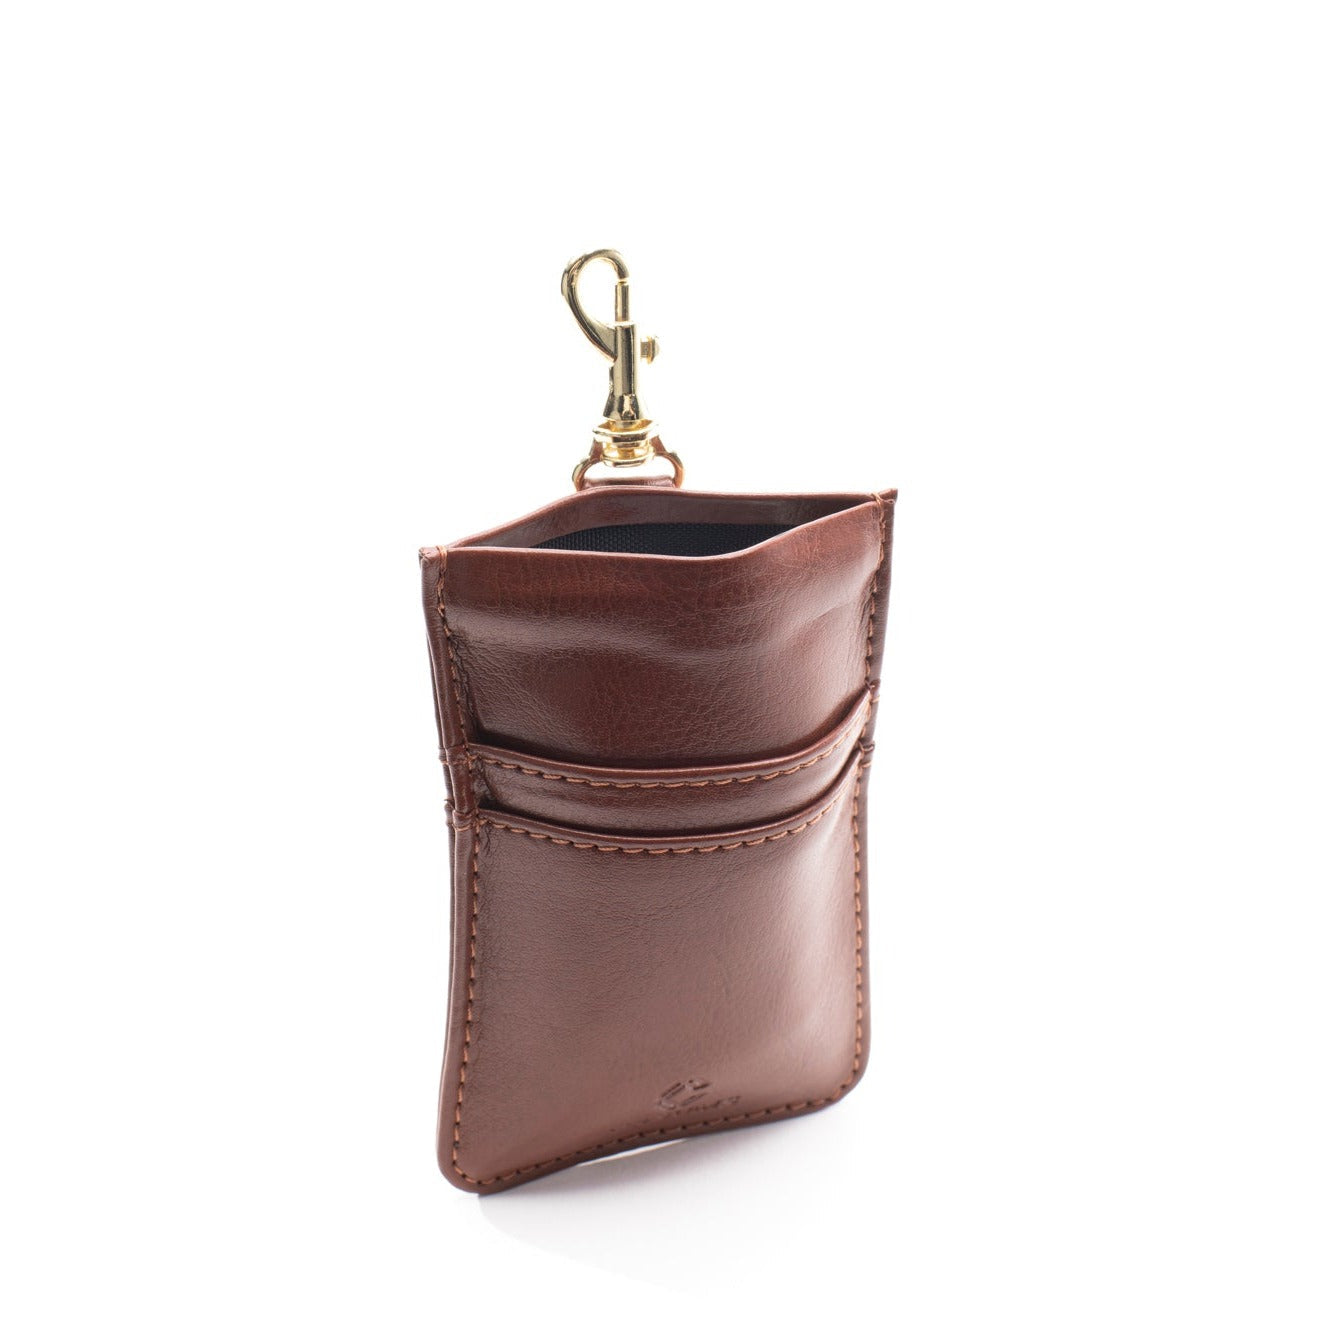 Card Case Wallet - Tan - Gold Toned Hardware